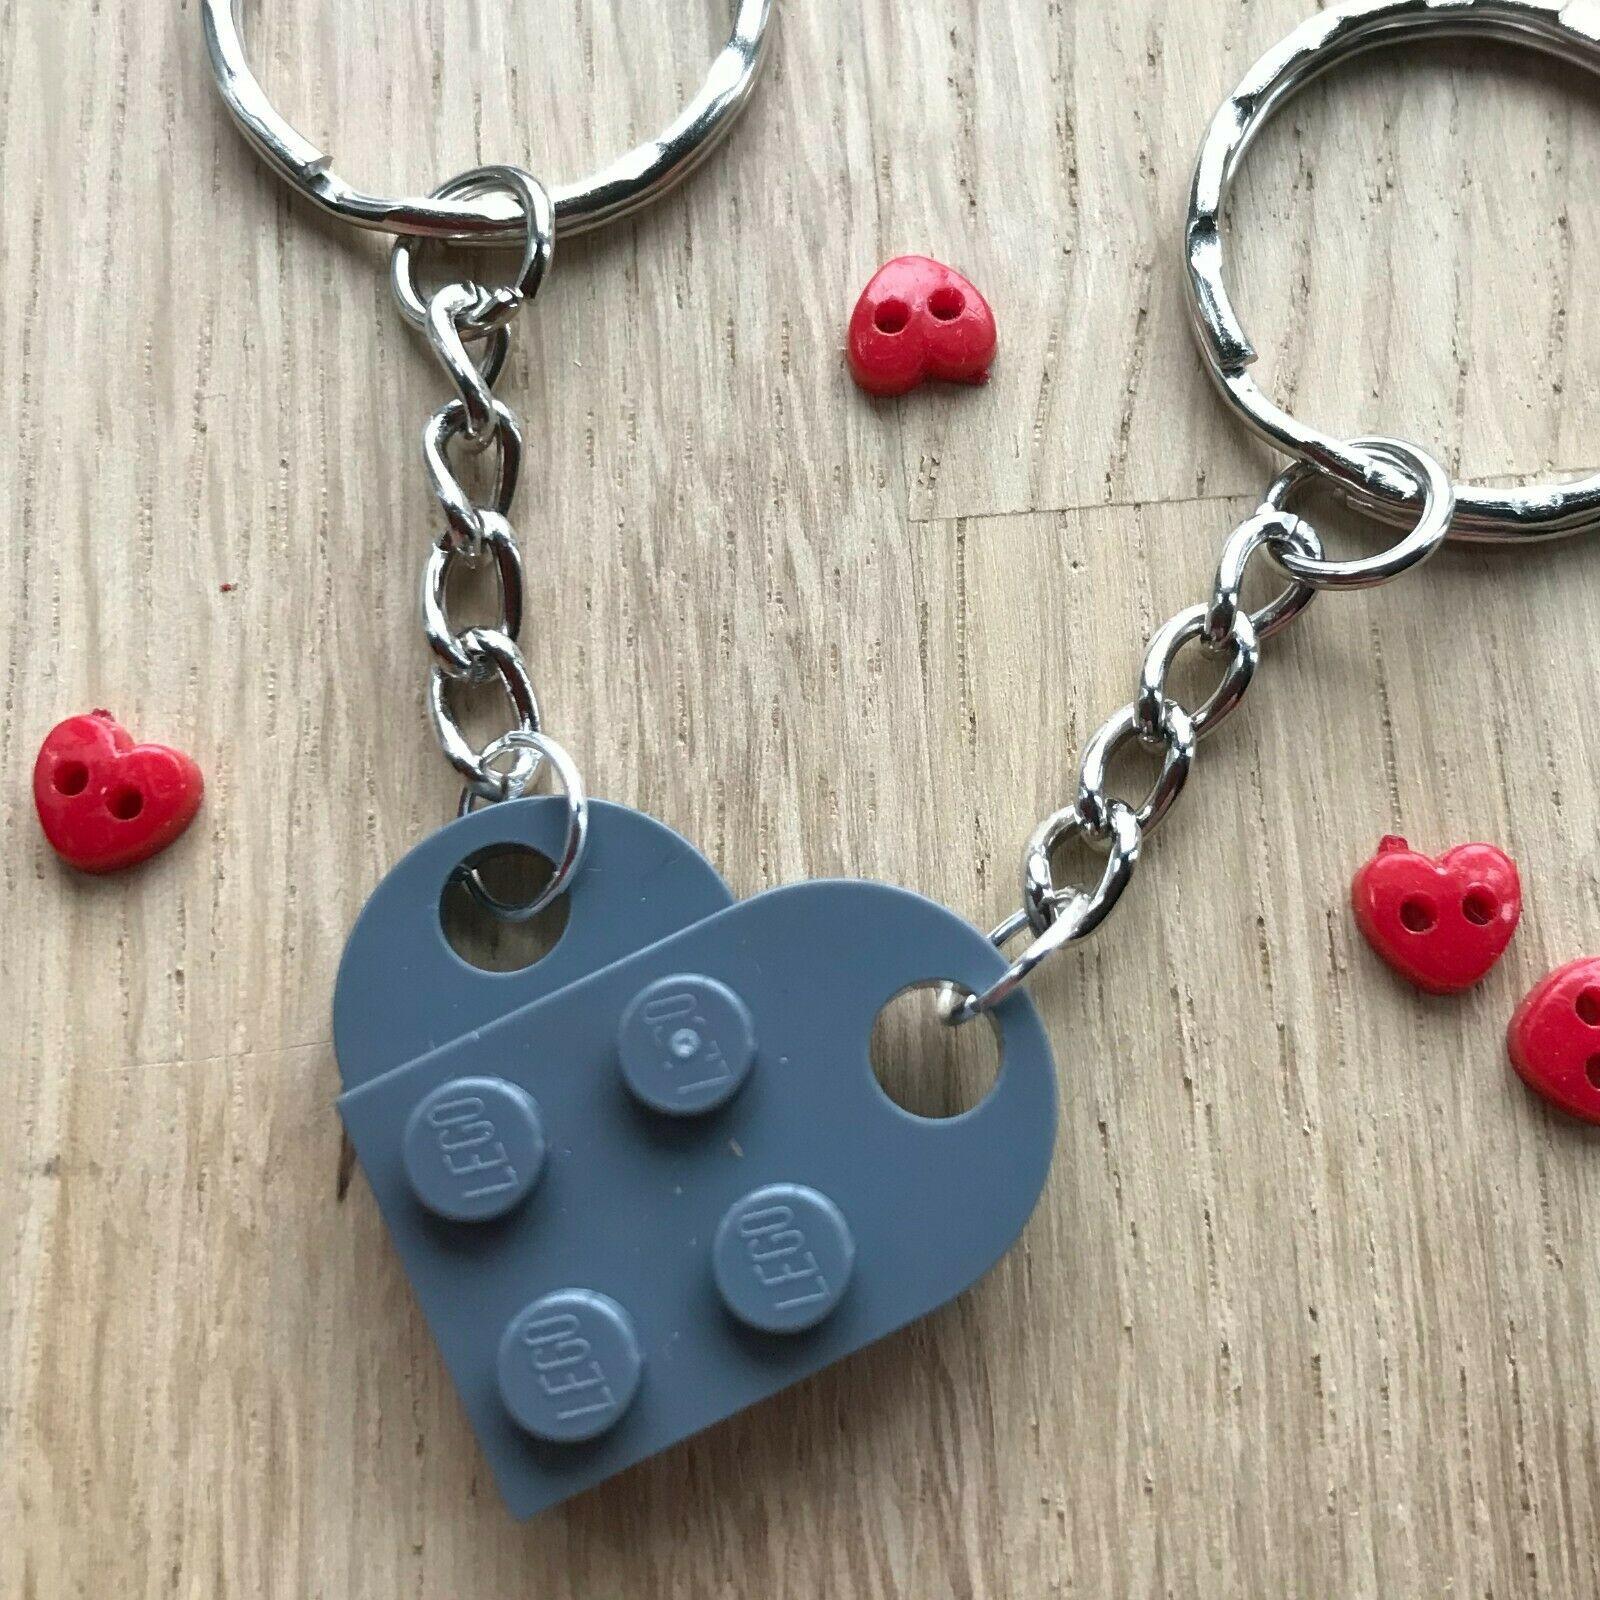 Heart Keyring Keychain made with LEGO ® CAN BE PERSONALISED WITH INITIALS 